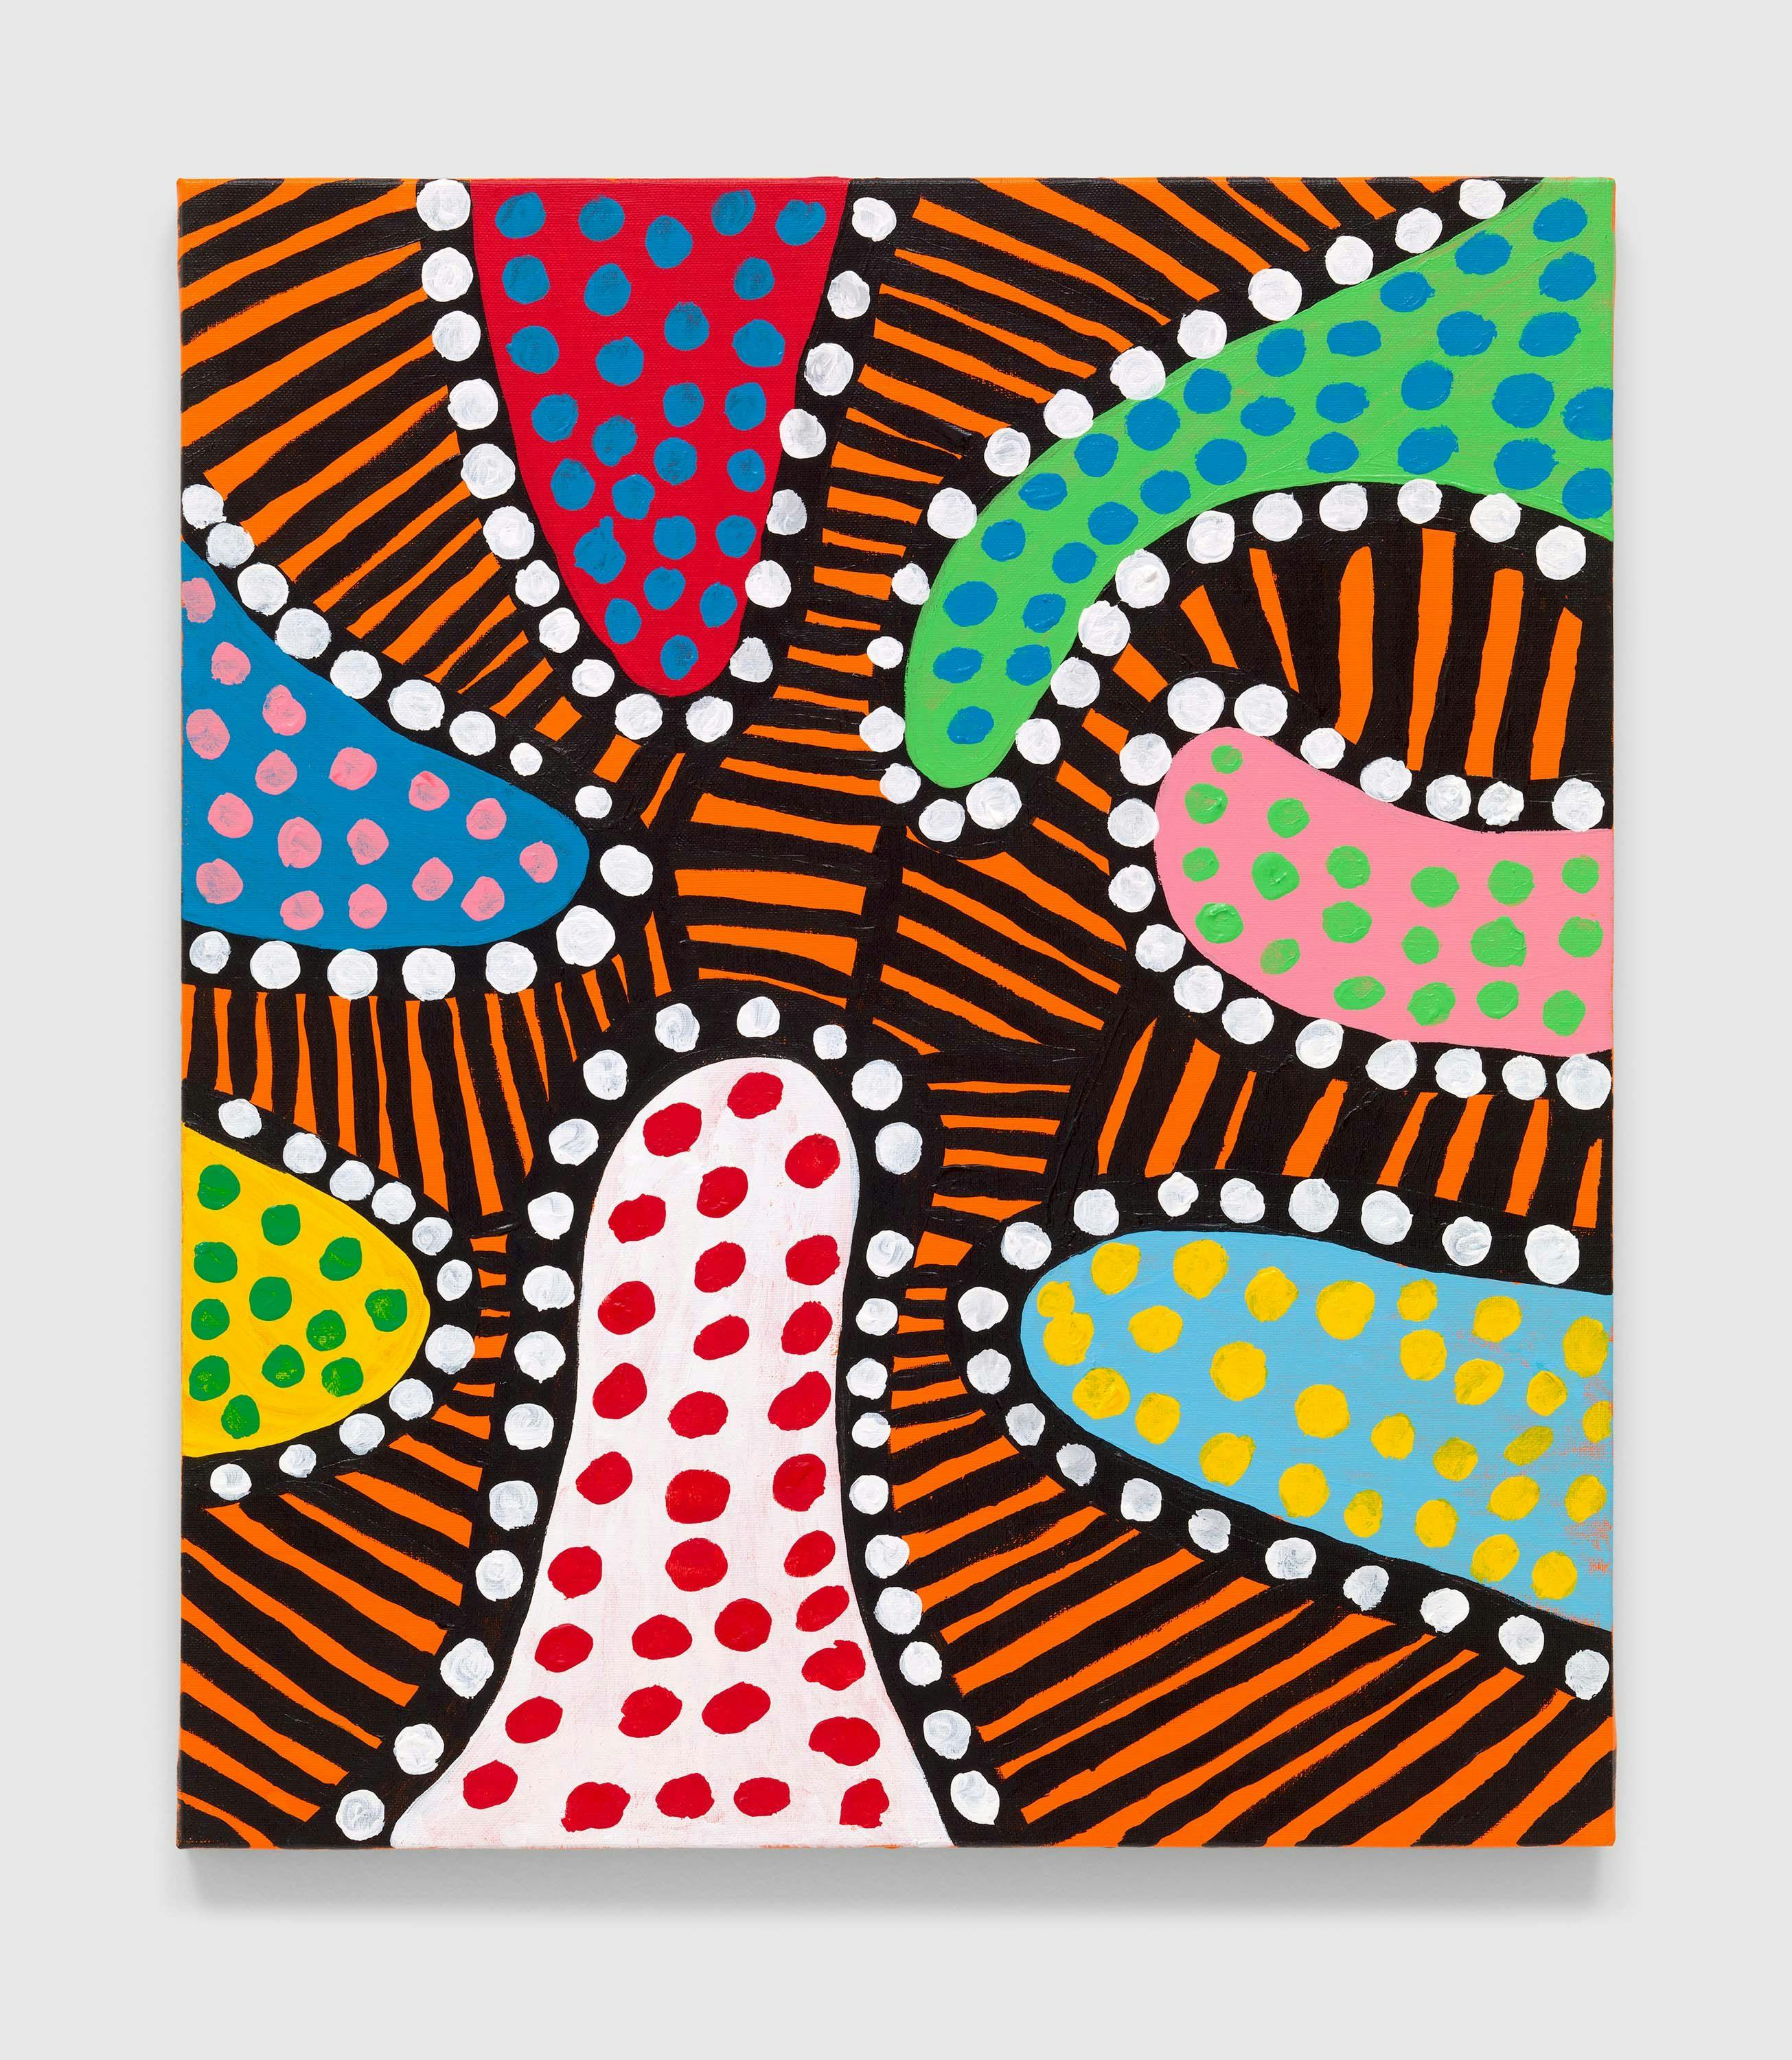 A painting by Yayoi Kusama, titled ﻿EVERY DAY I PRAY FOR LOVE, dated 2022.